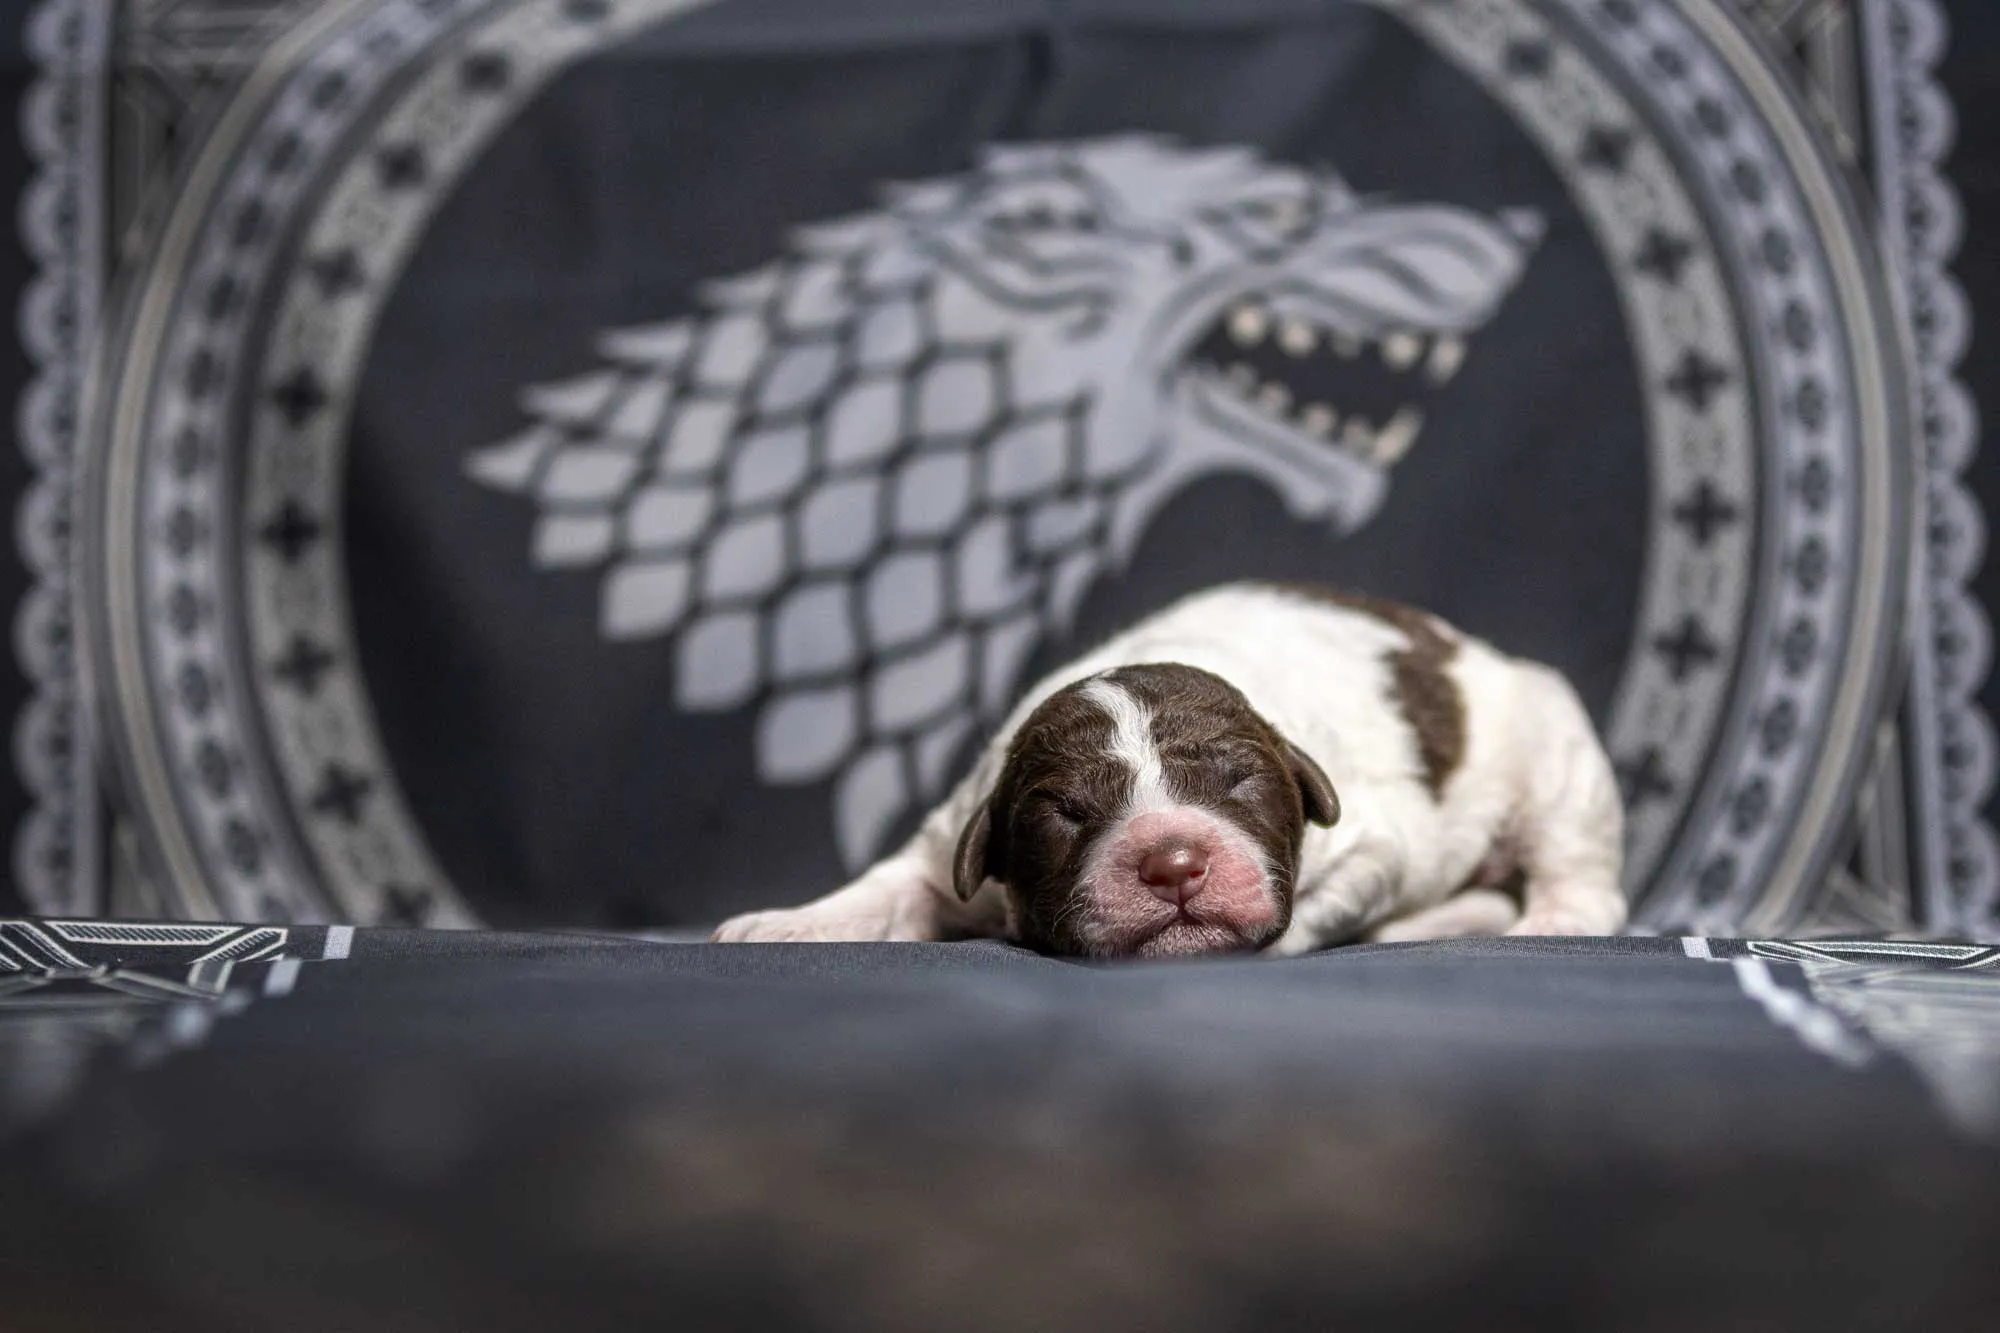 Game Of Thrones litter 2023